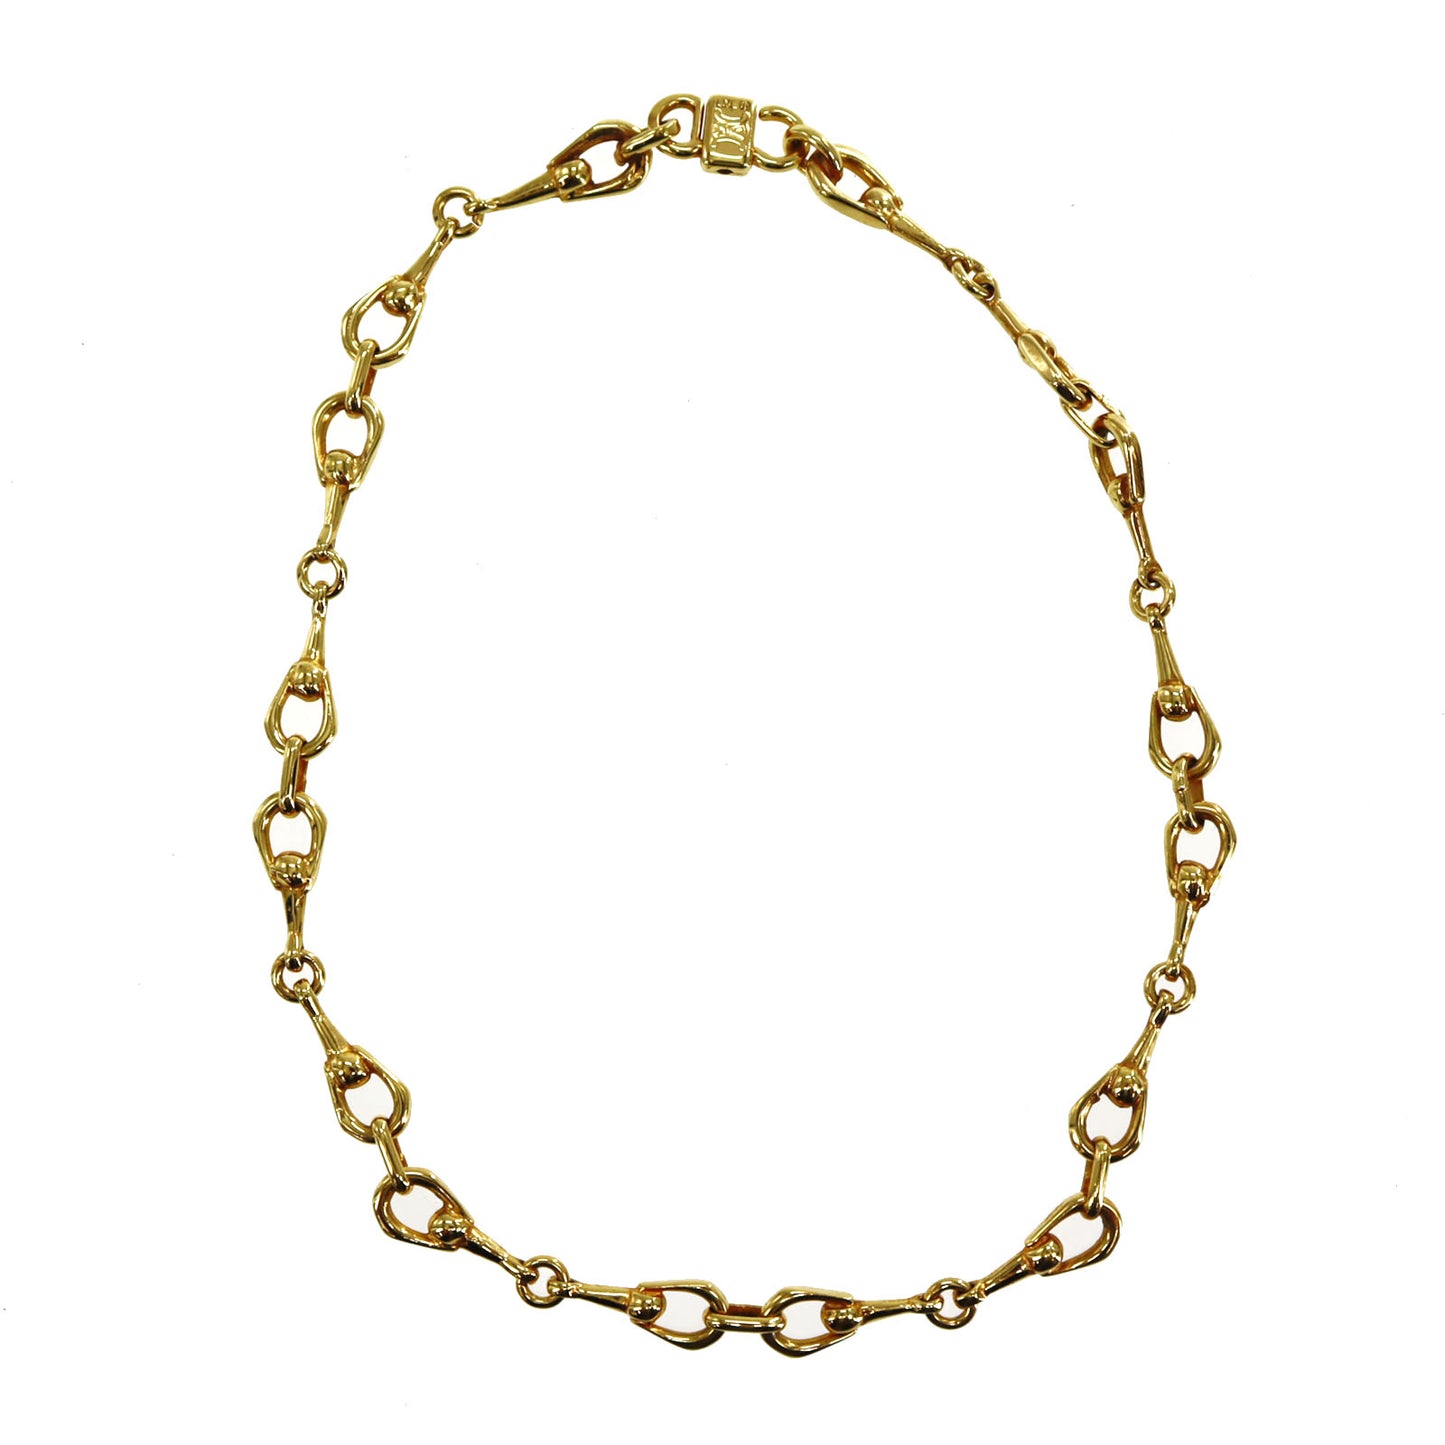 CELINE Logos Gold Plated Chain Necklace #CE506